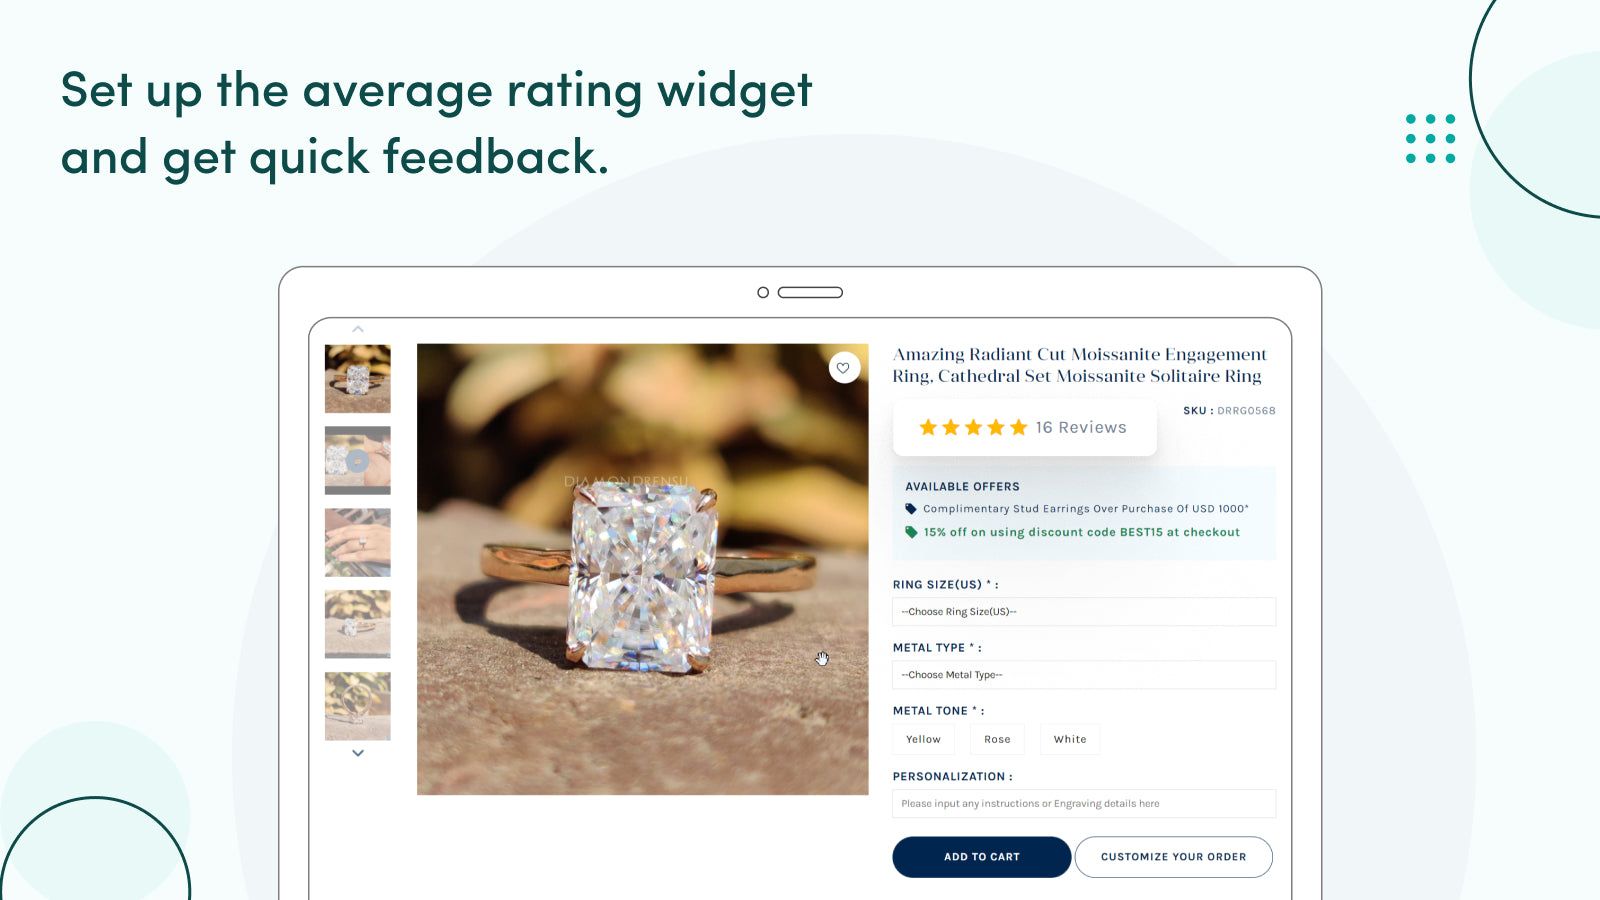 Get quick feedback with the average rating widget.